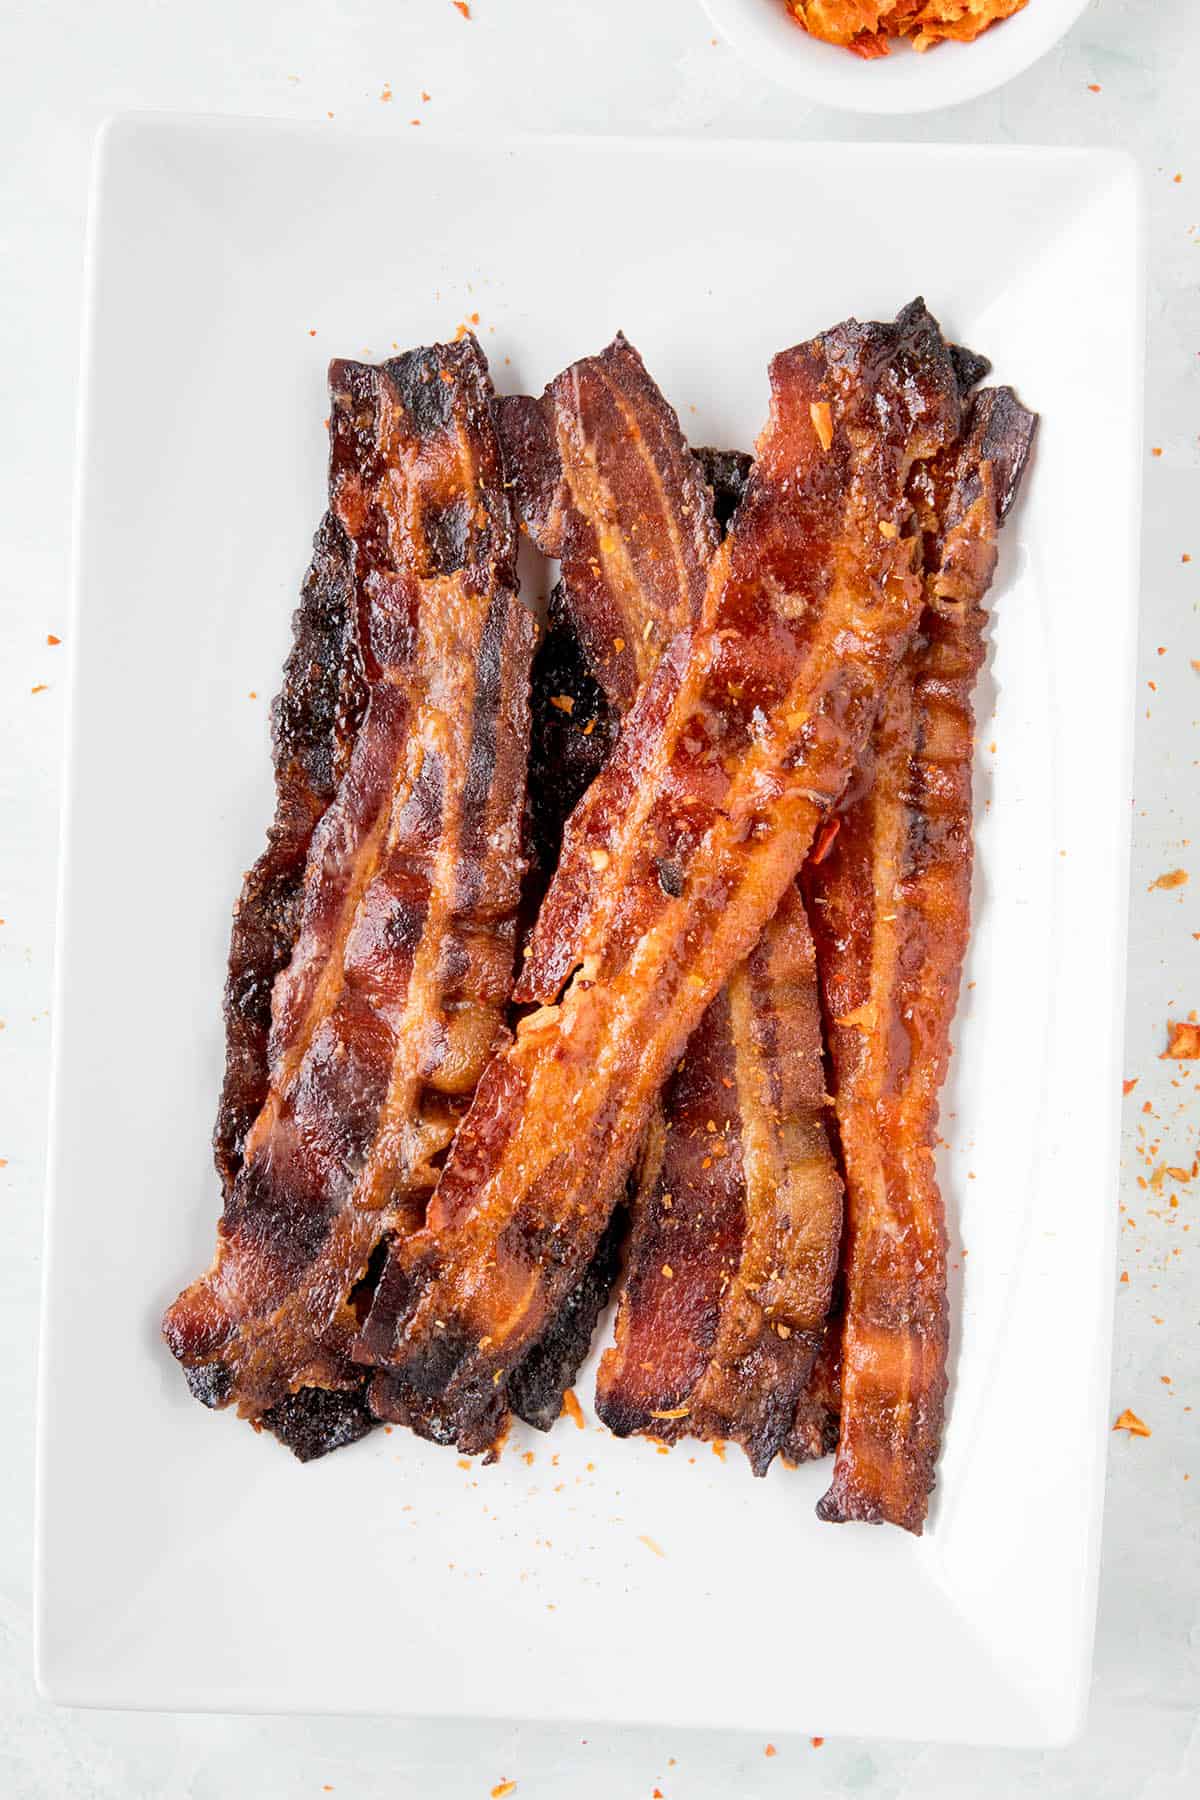 Ghost Pepper Candied Bacon - On a plate